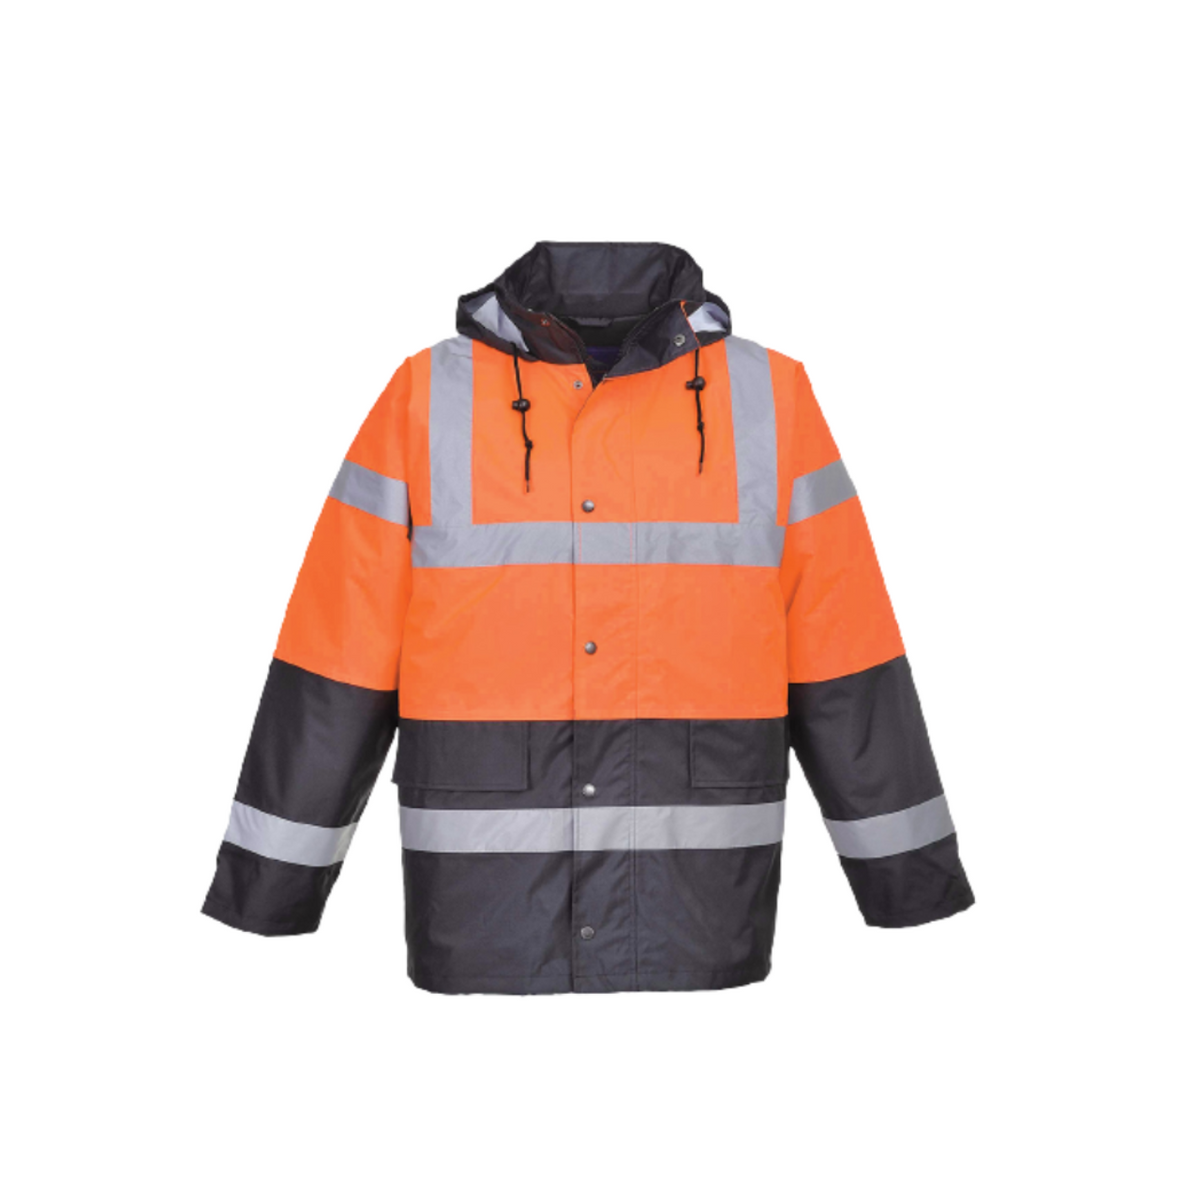 Portwest Hi-Vis Two Tone Traffic Jacket Waterproof Reflective Tape Work S467-Collins Clothing Co